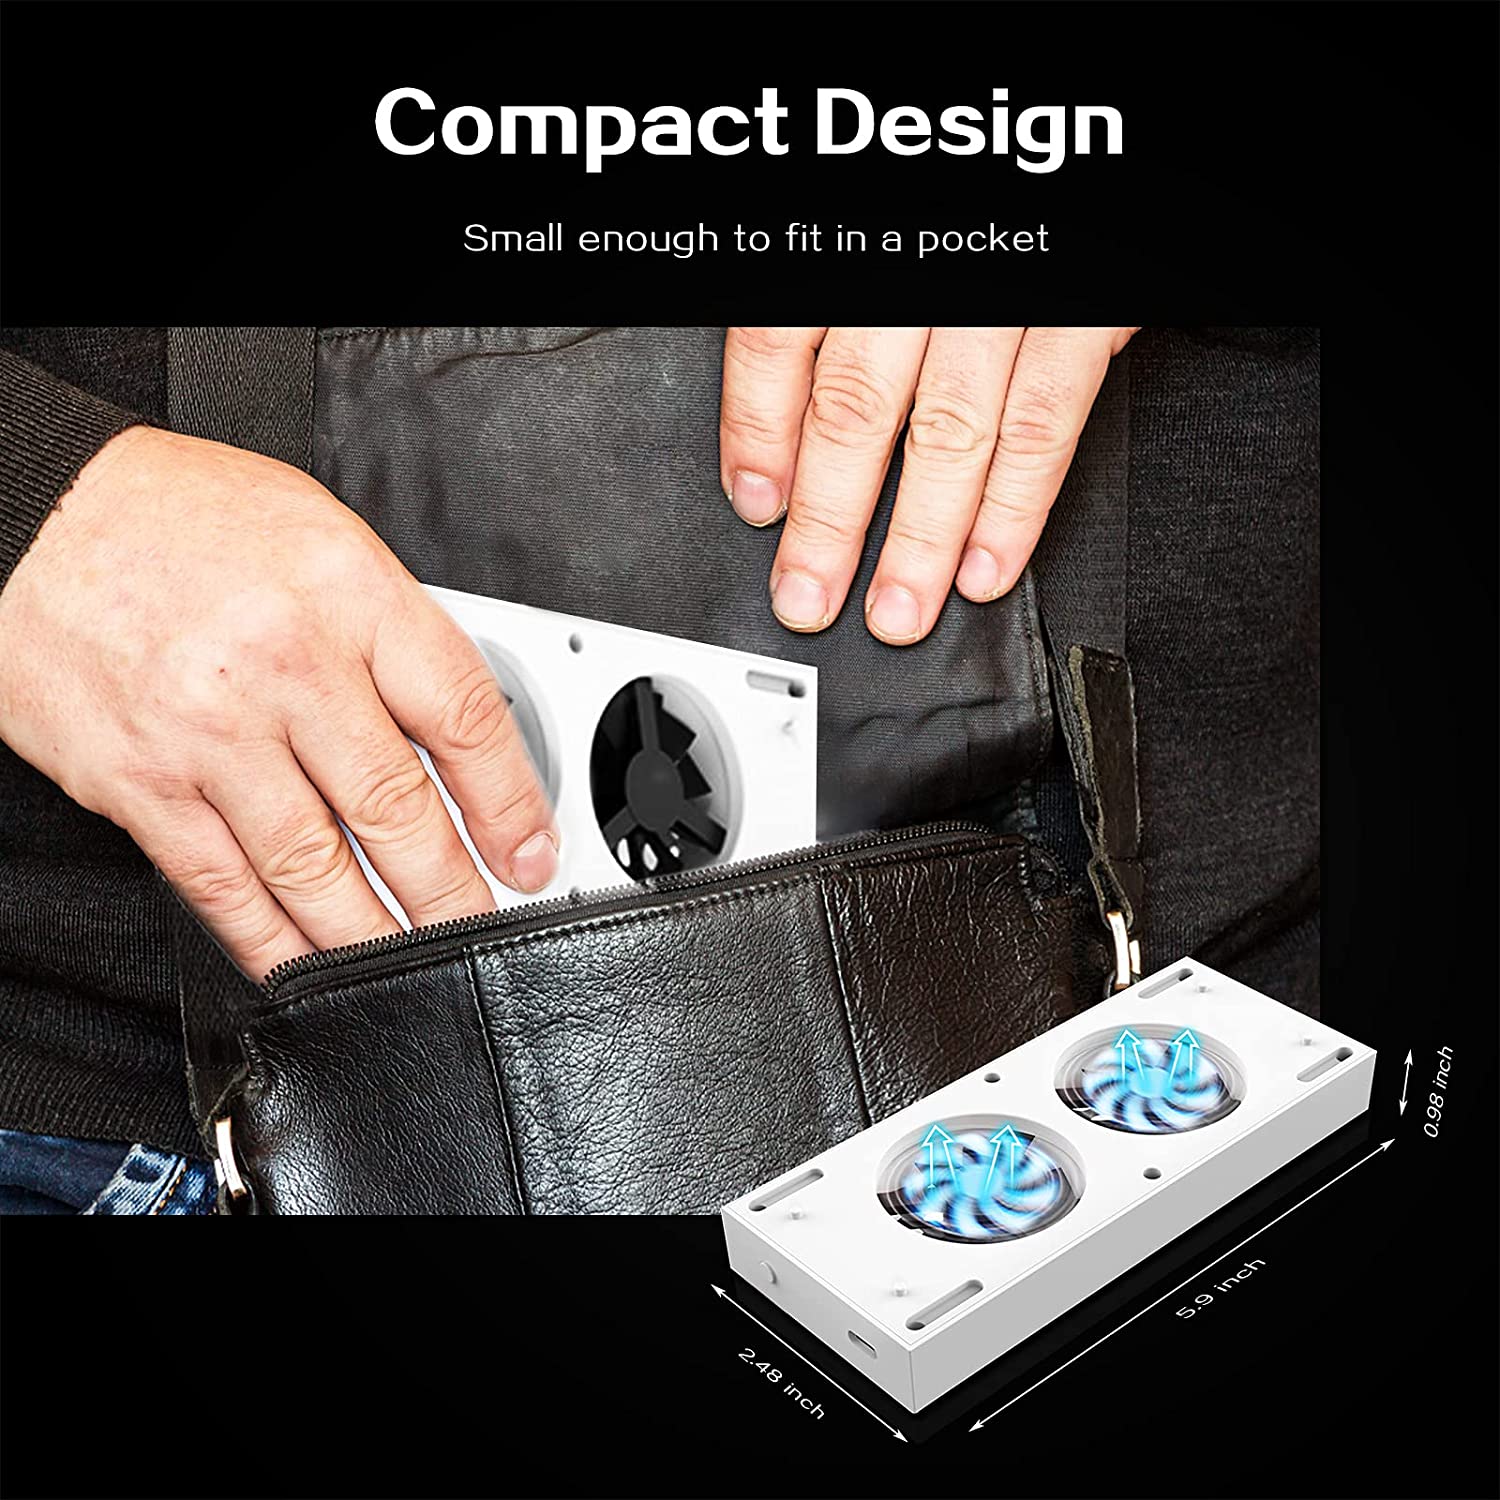 Compact and portable design that can be easily stored in a bag.